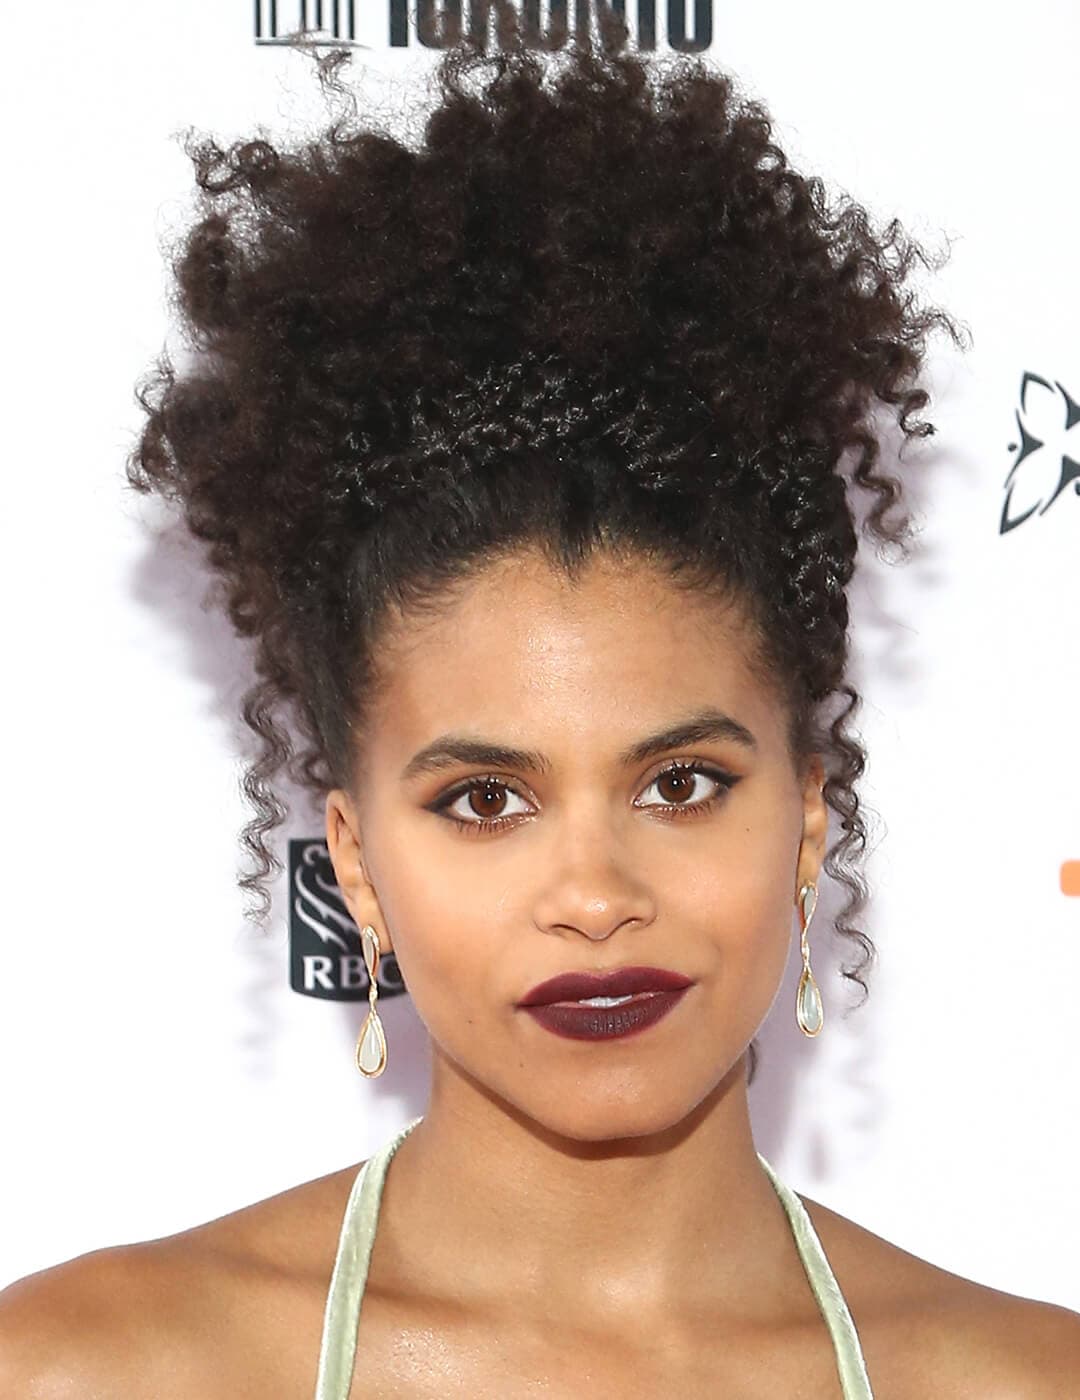 Zazie Beetz in a spaghetti strapped dress and rocking a curly updo with braided hair as headband